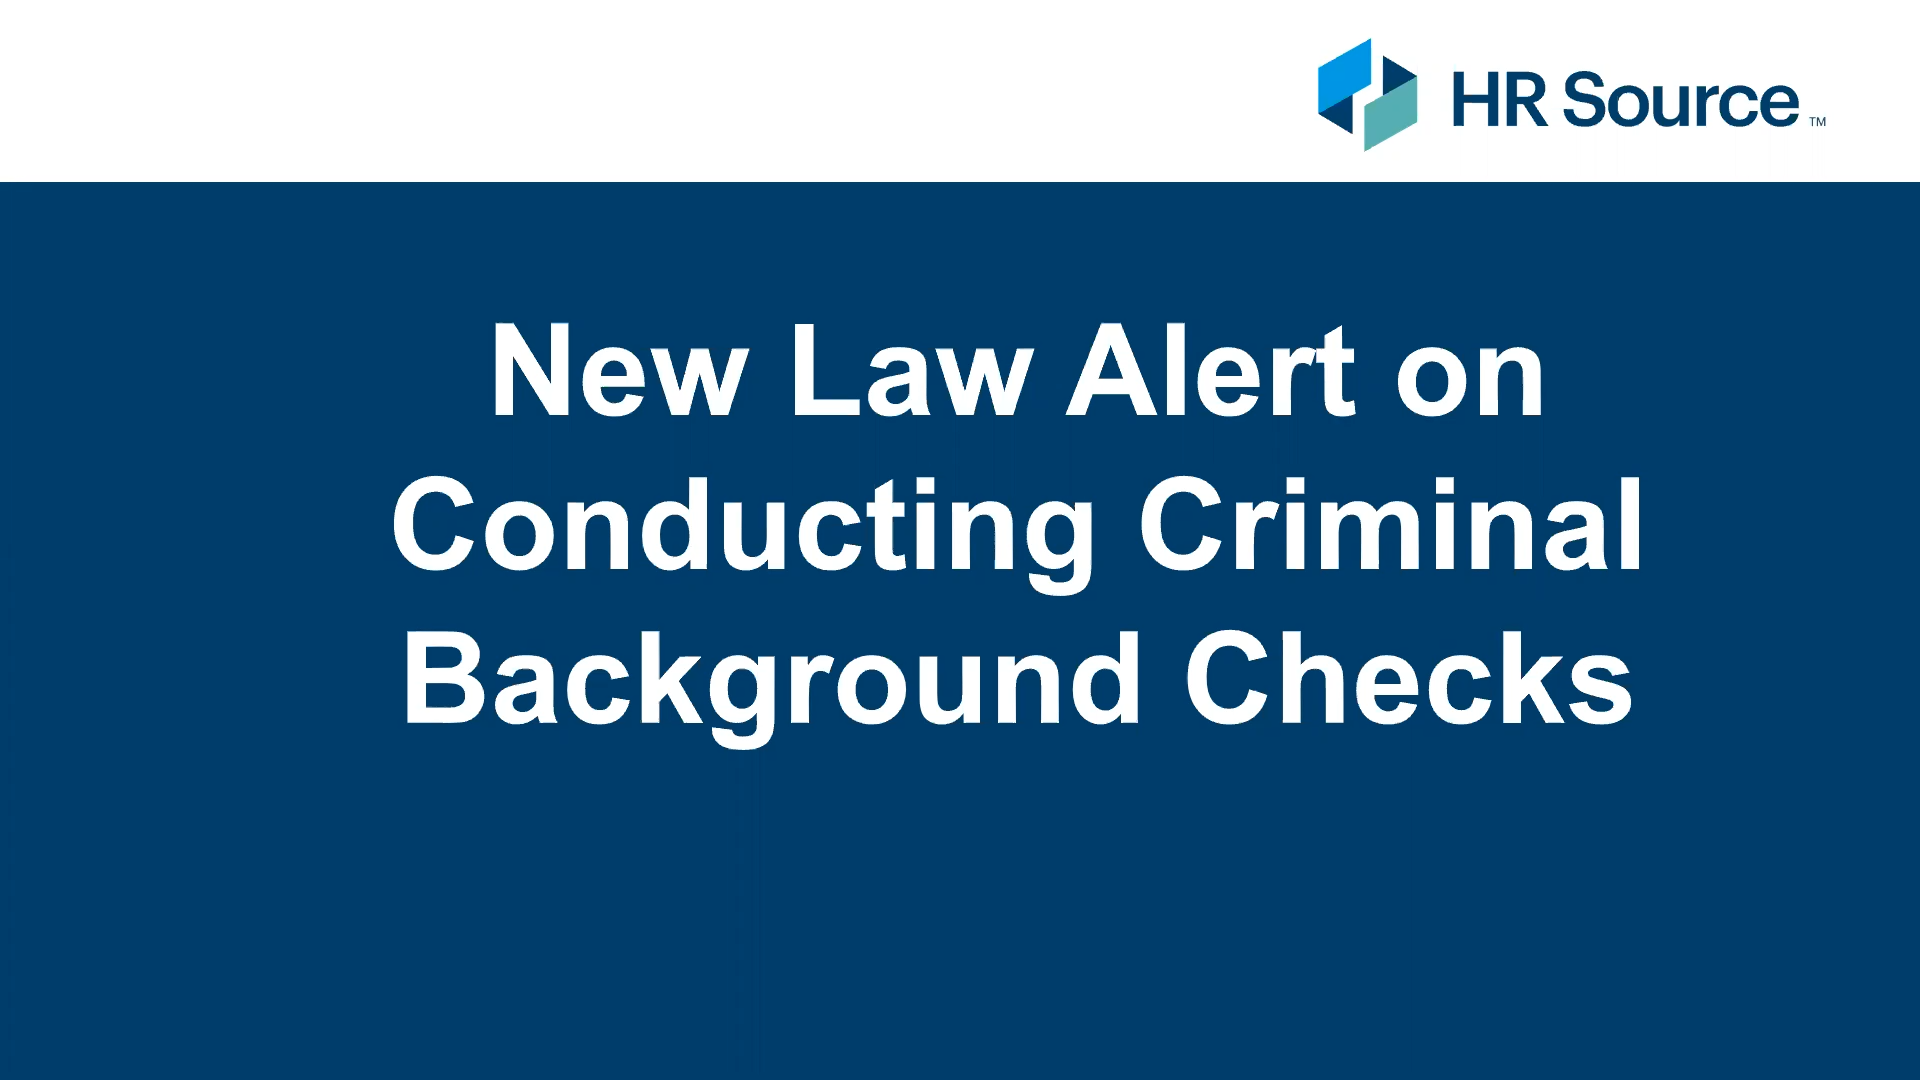 New Law Alert on Conducting Criminal Background Checks